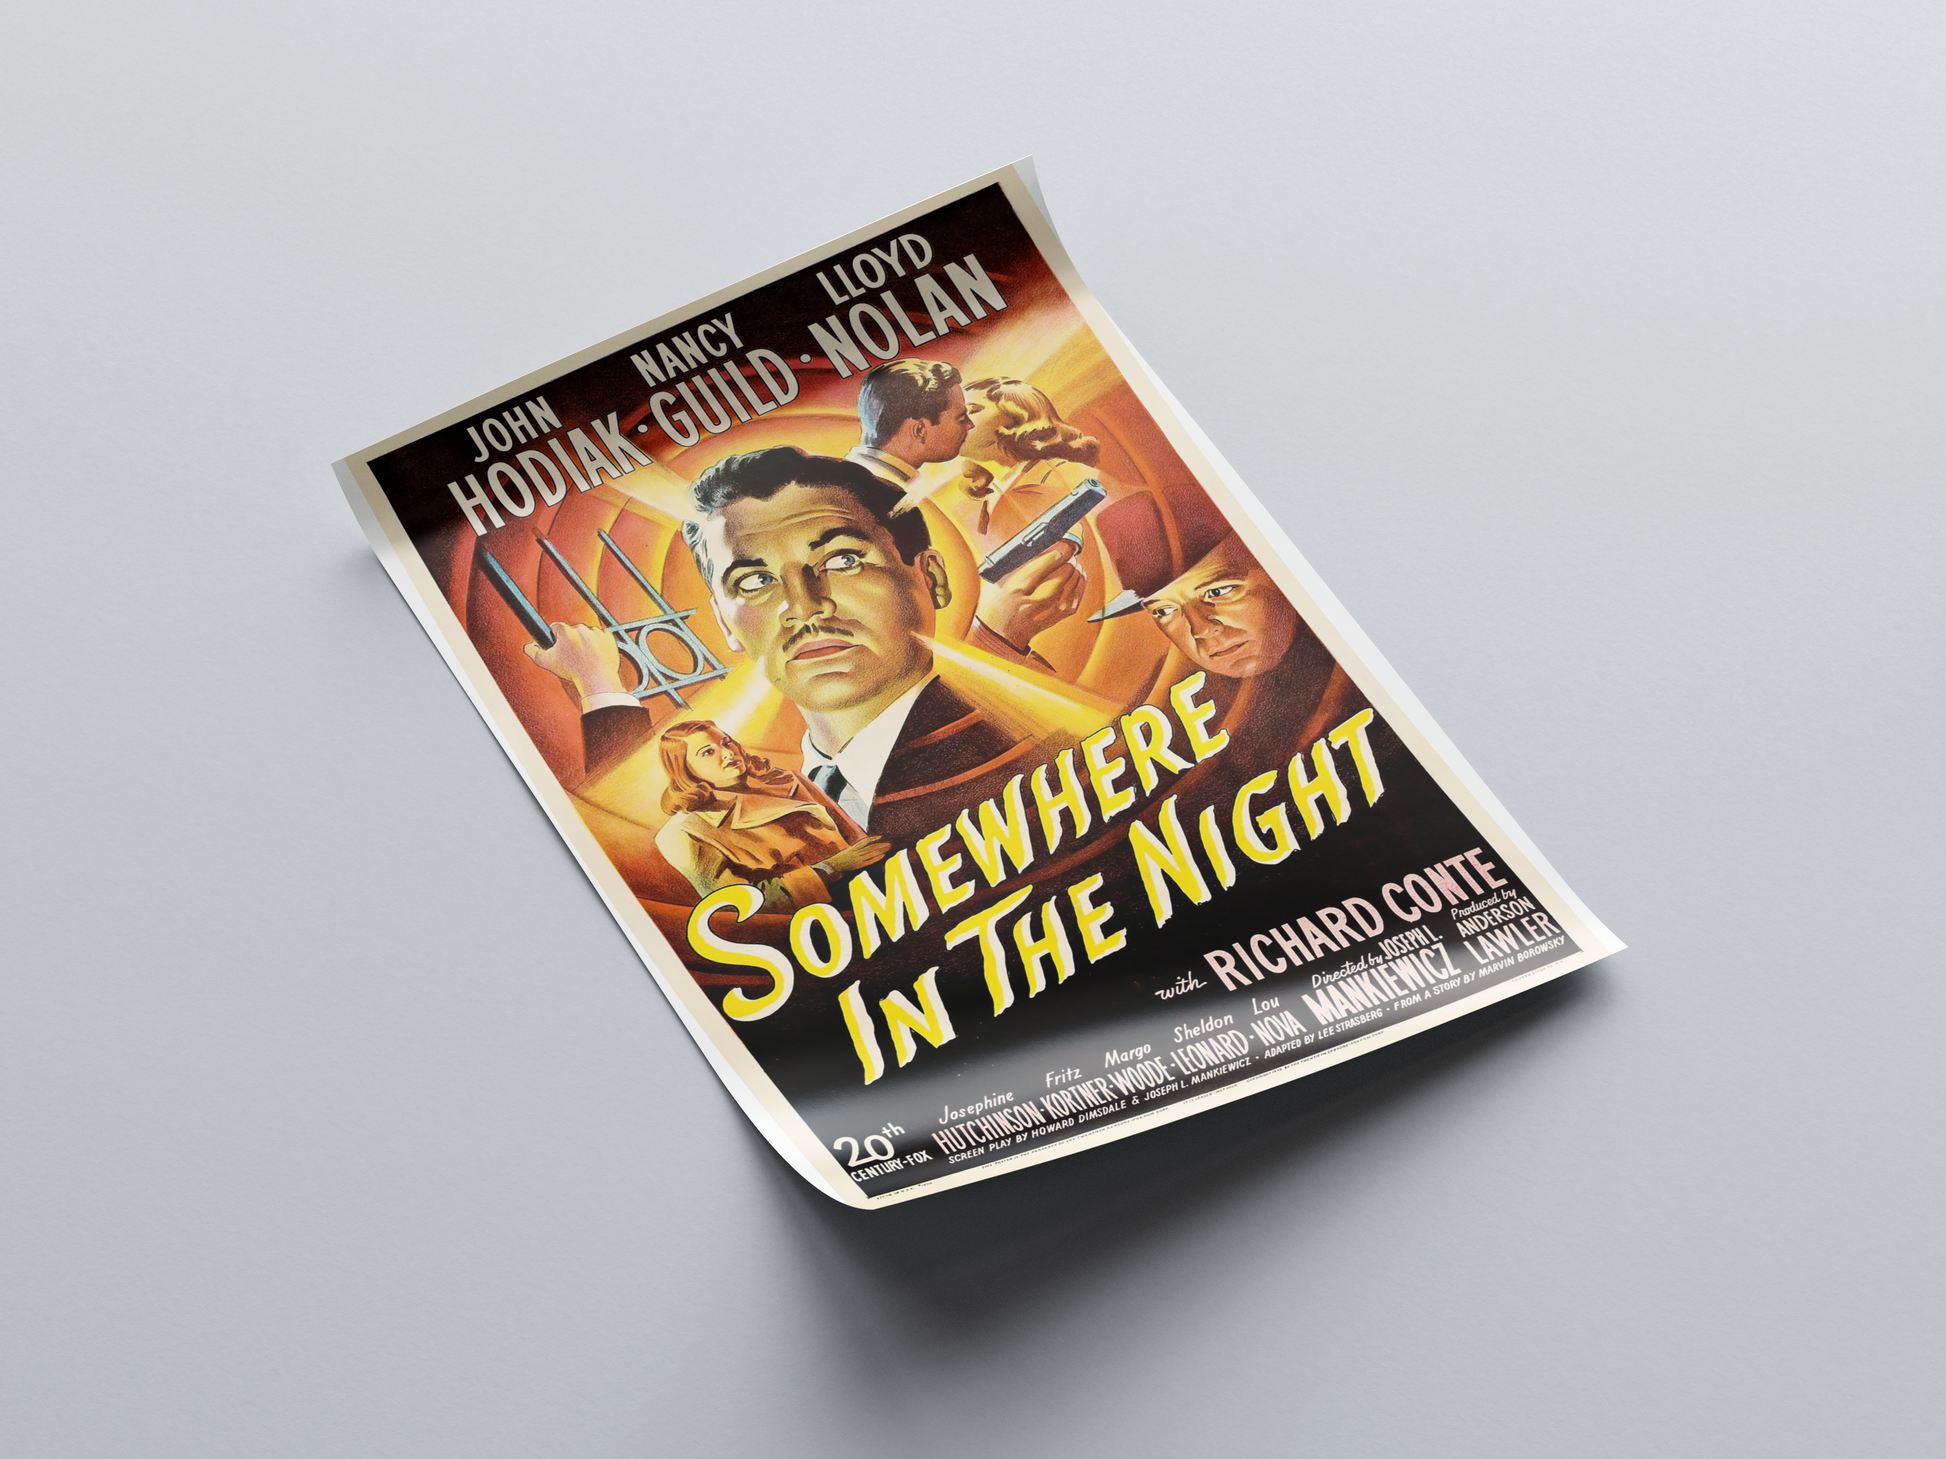 Somewhere in the Night (1946) Movie Poster displayed in interior setting